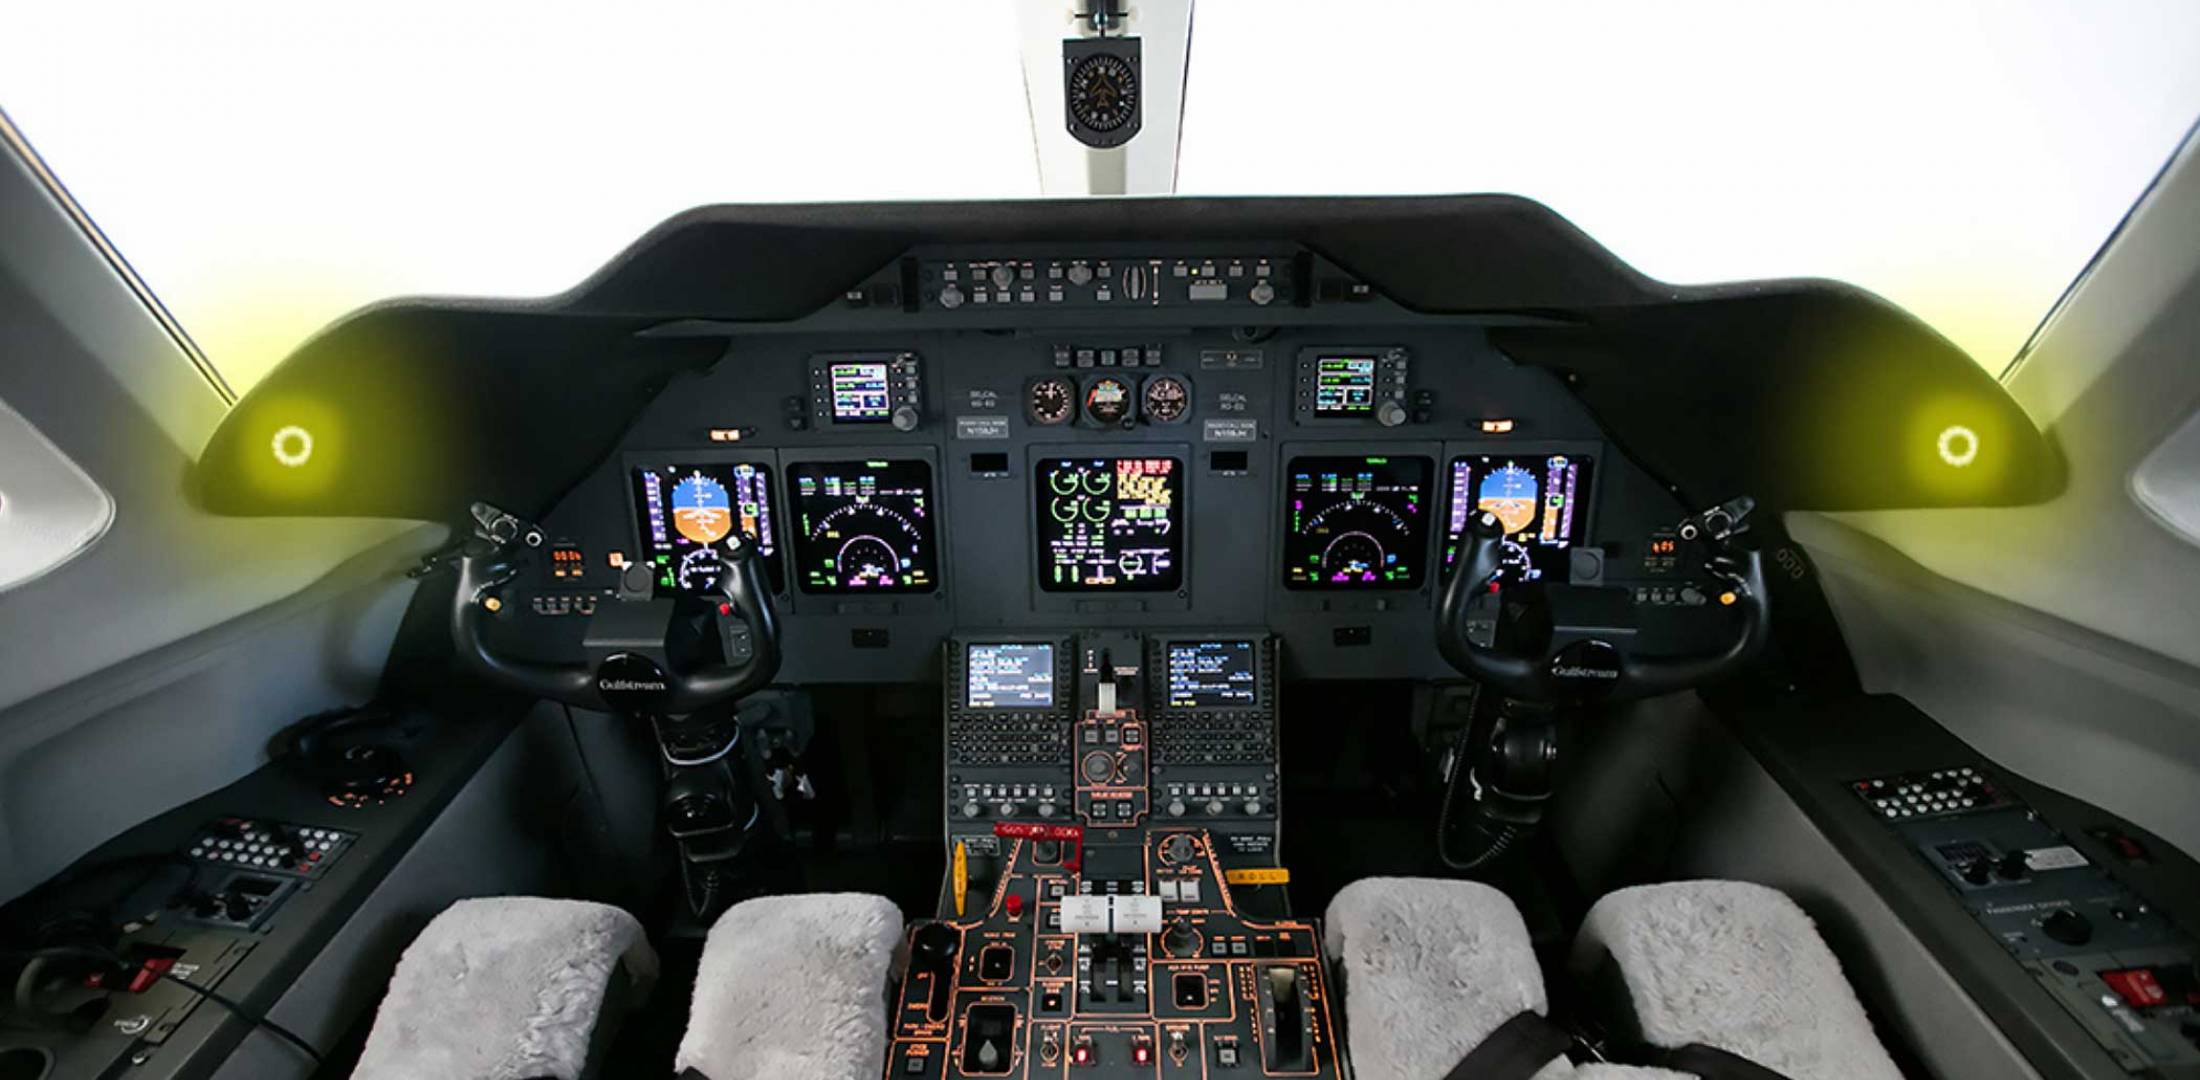 The Q-Alpha low-airspeed alerting system at the corners of the glareshield is designed to capture a pilot’s attention—even when the pilot is focusing elsewhere—with a bright visual alert and audible warnings.